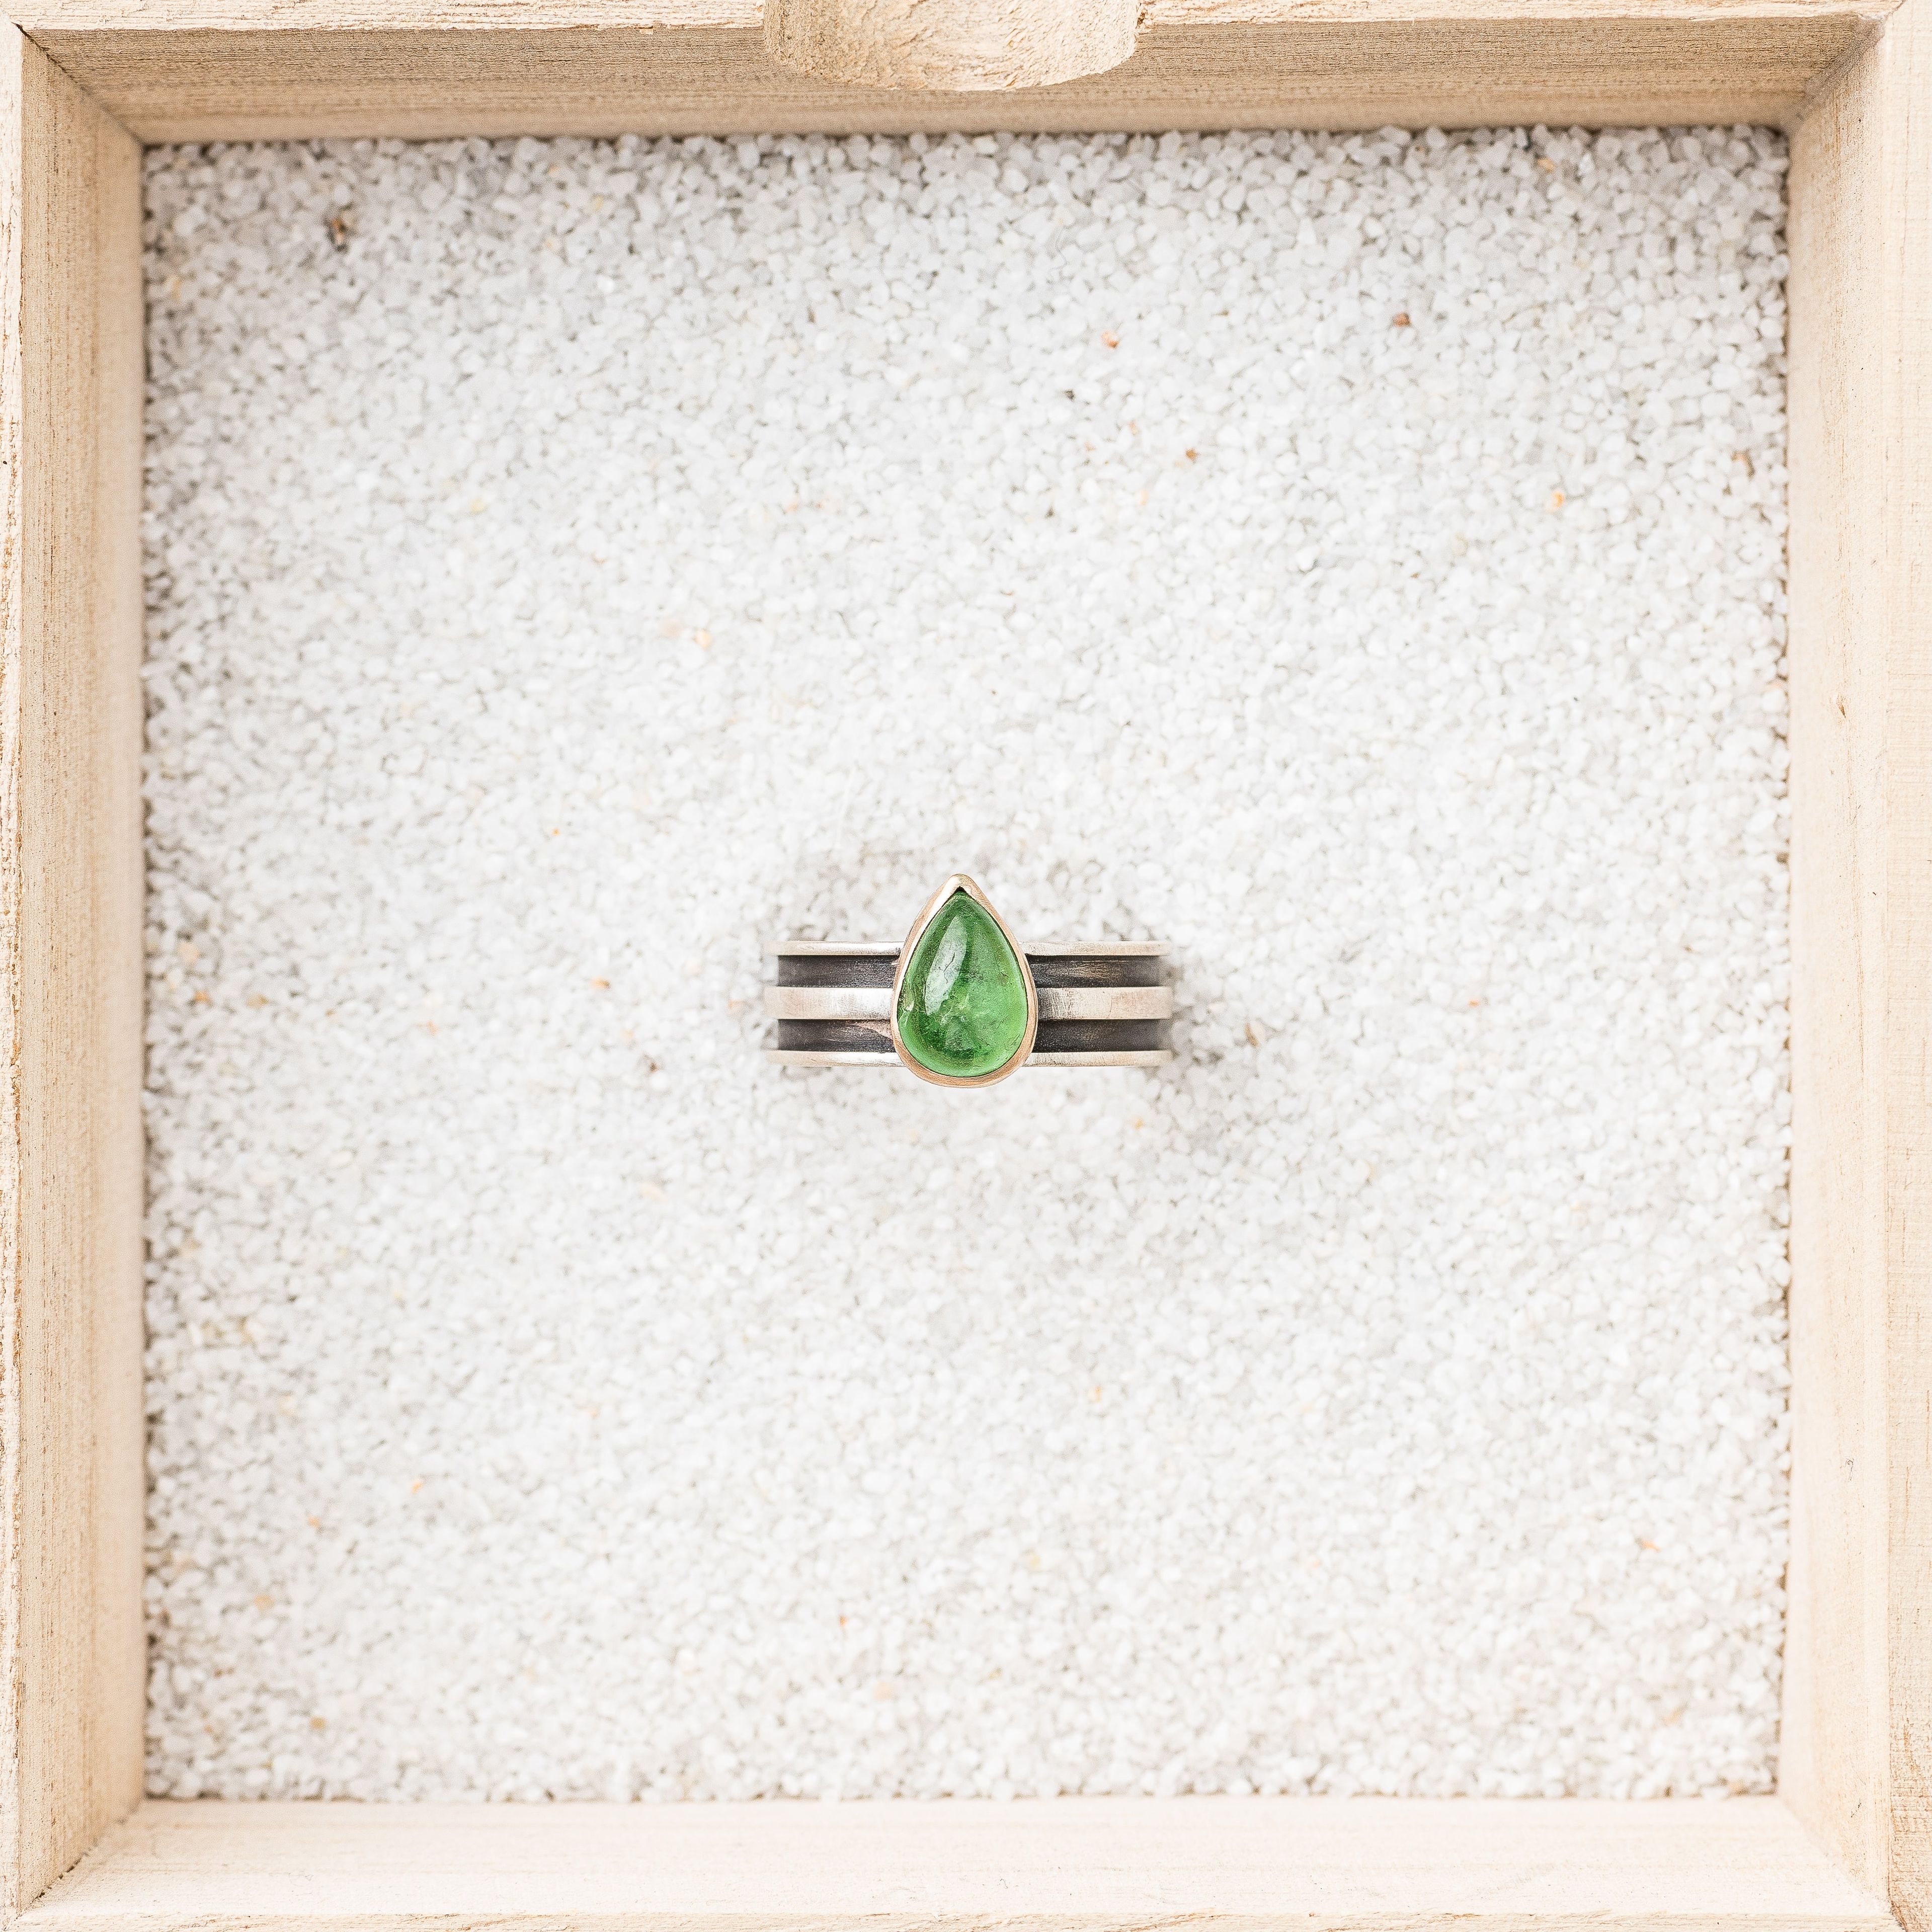 Green Tourmaline Pear Ring with 14k Gold Bezel on Striped Band